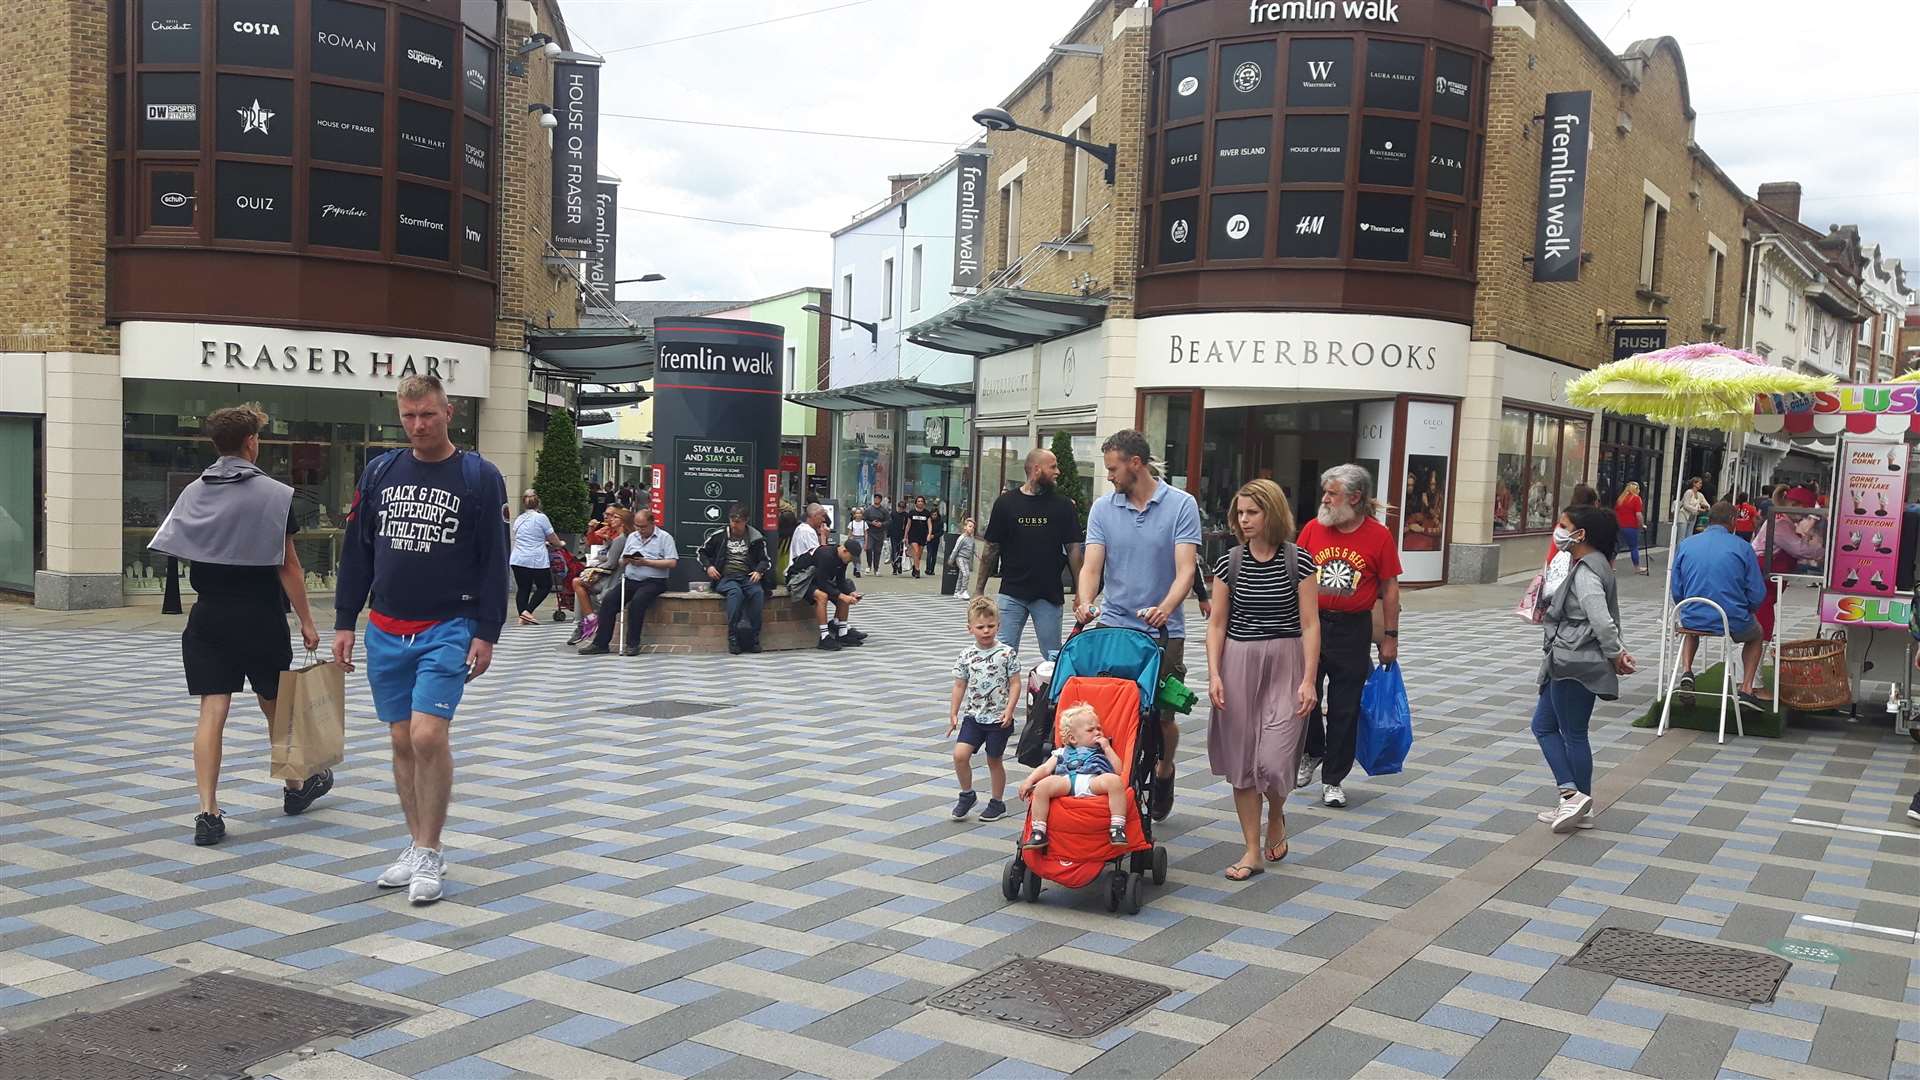 Maidstone has today been described as "rammed" by one shopper